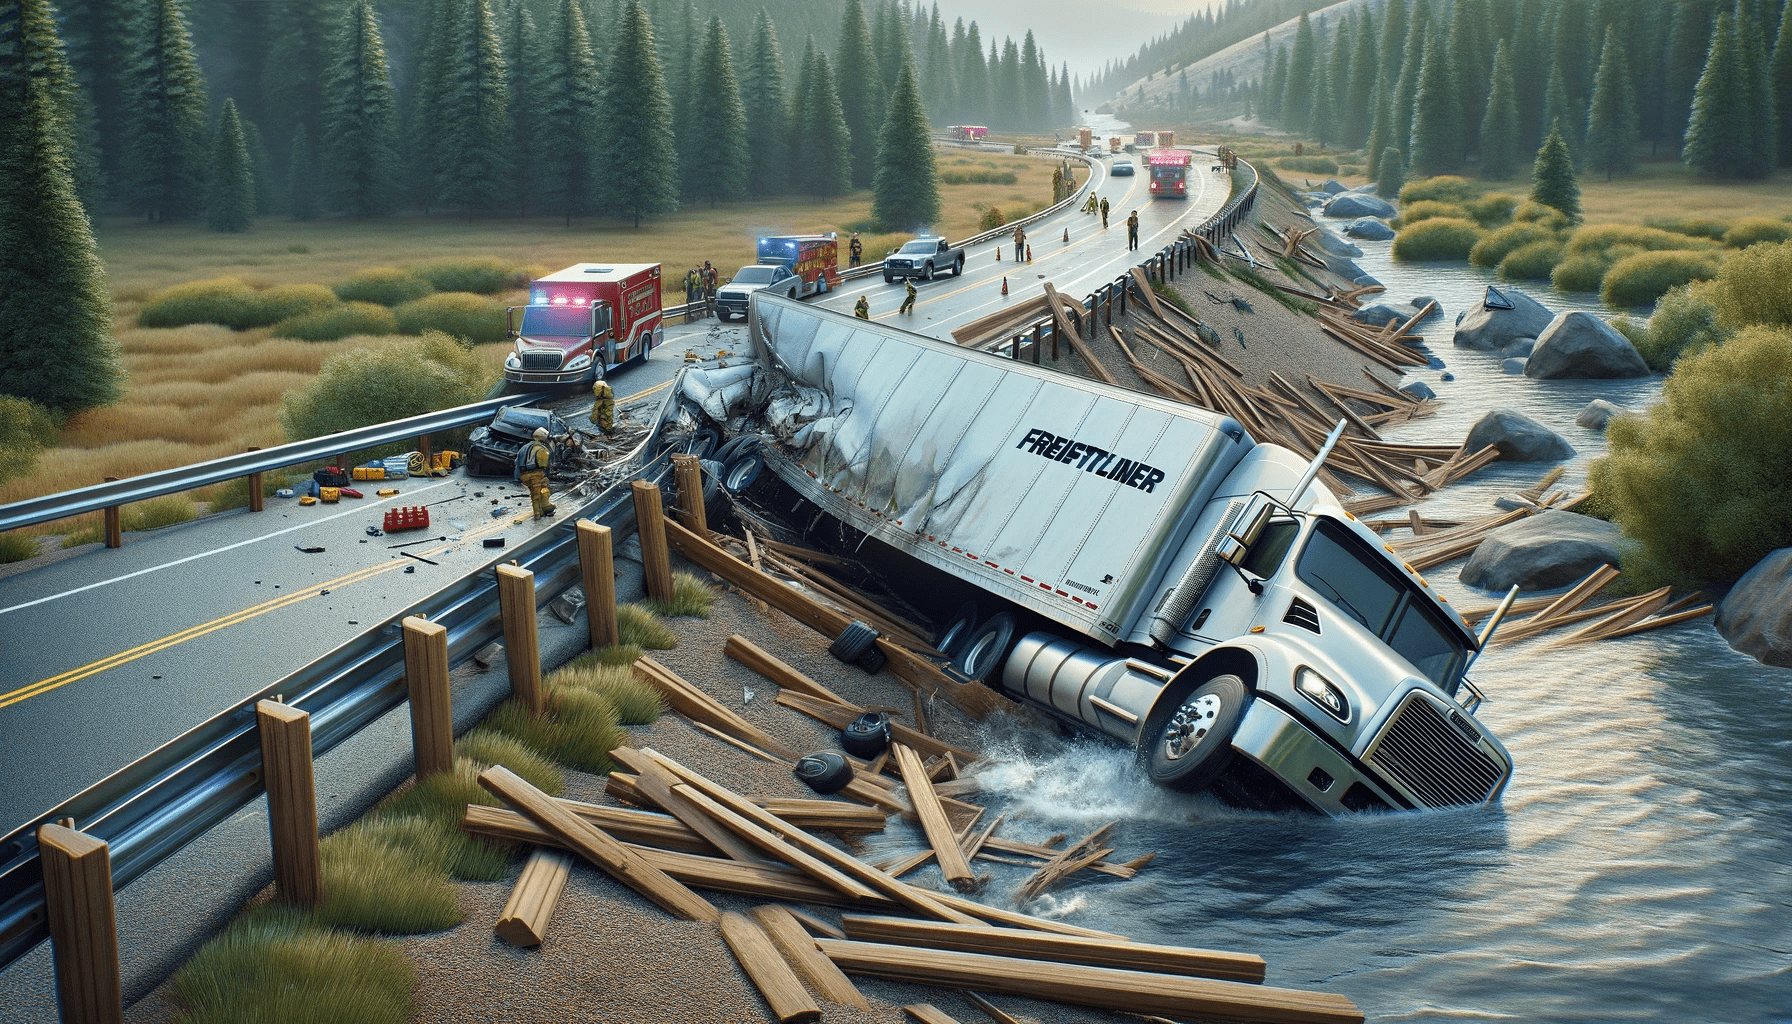 Big Rig Crashes into creek accident news graphic